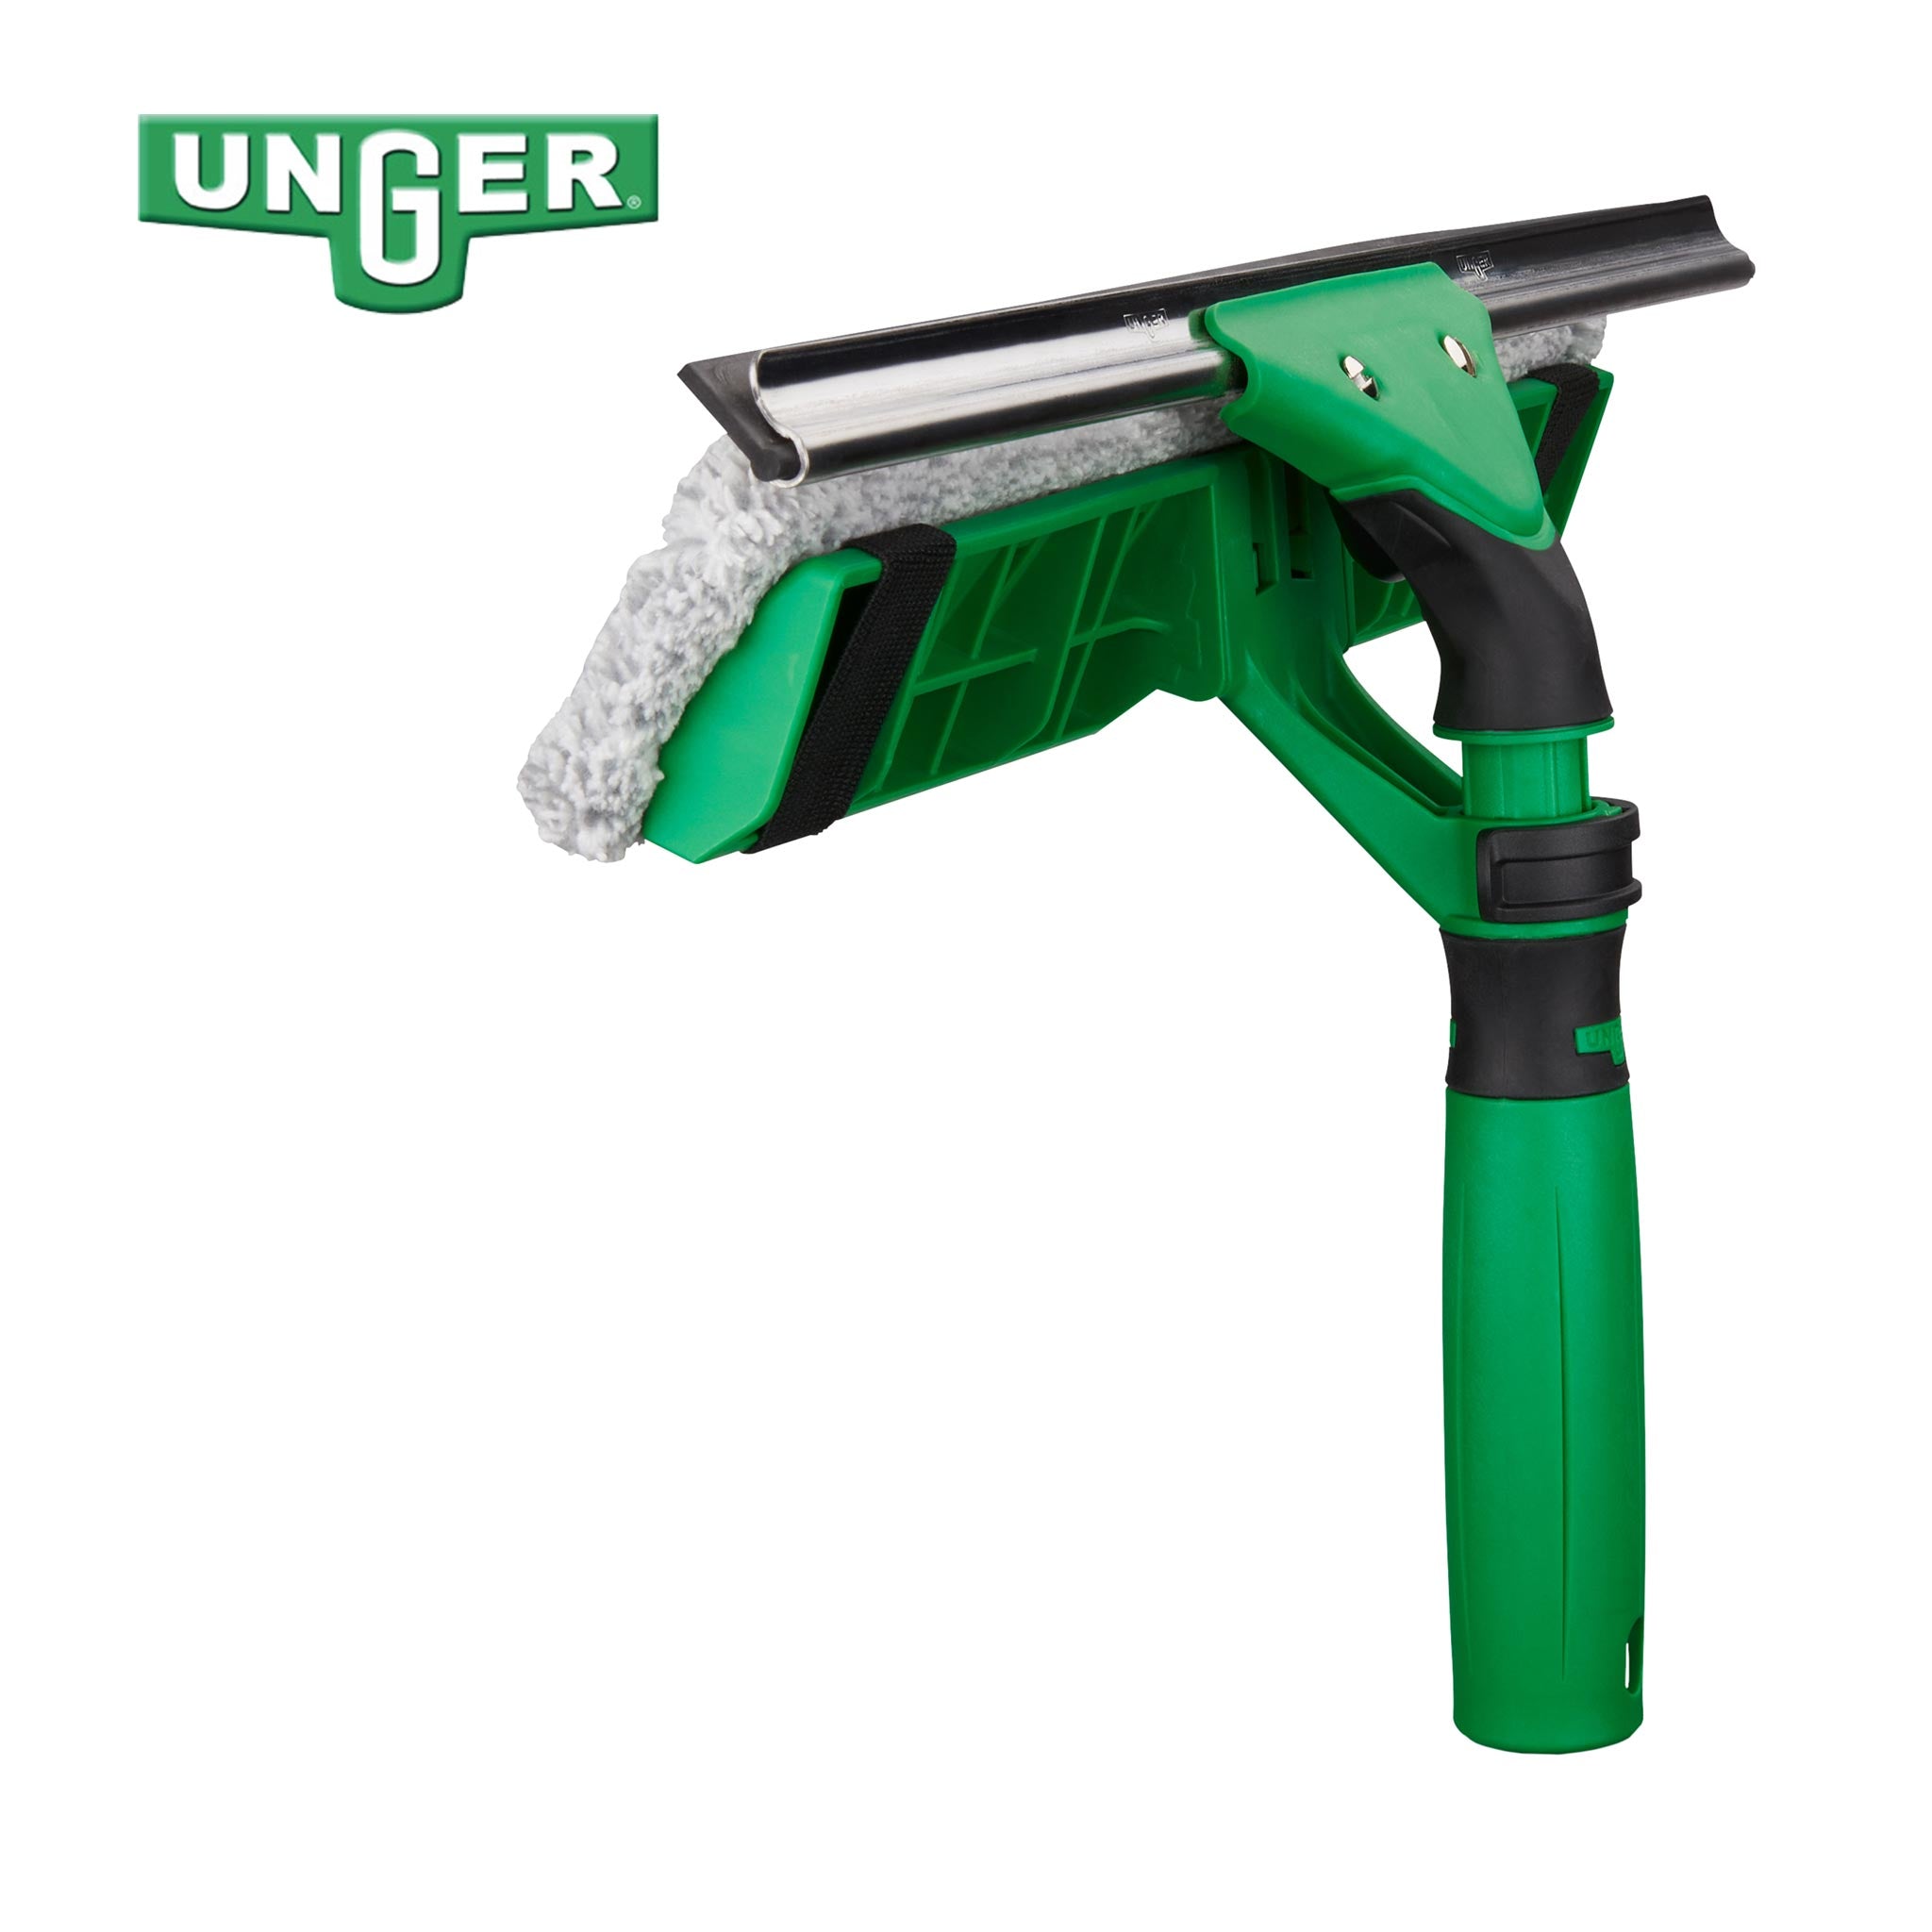 Unger Visa Versa Pro Squeegee Combo Tool for cleaning at height